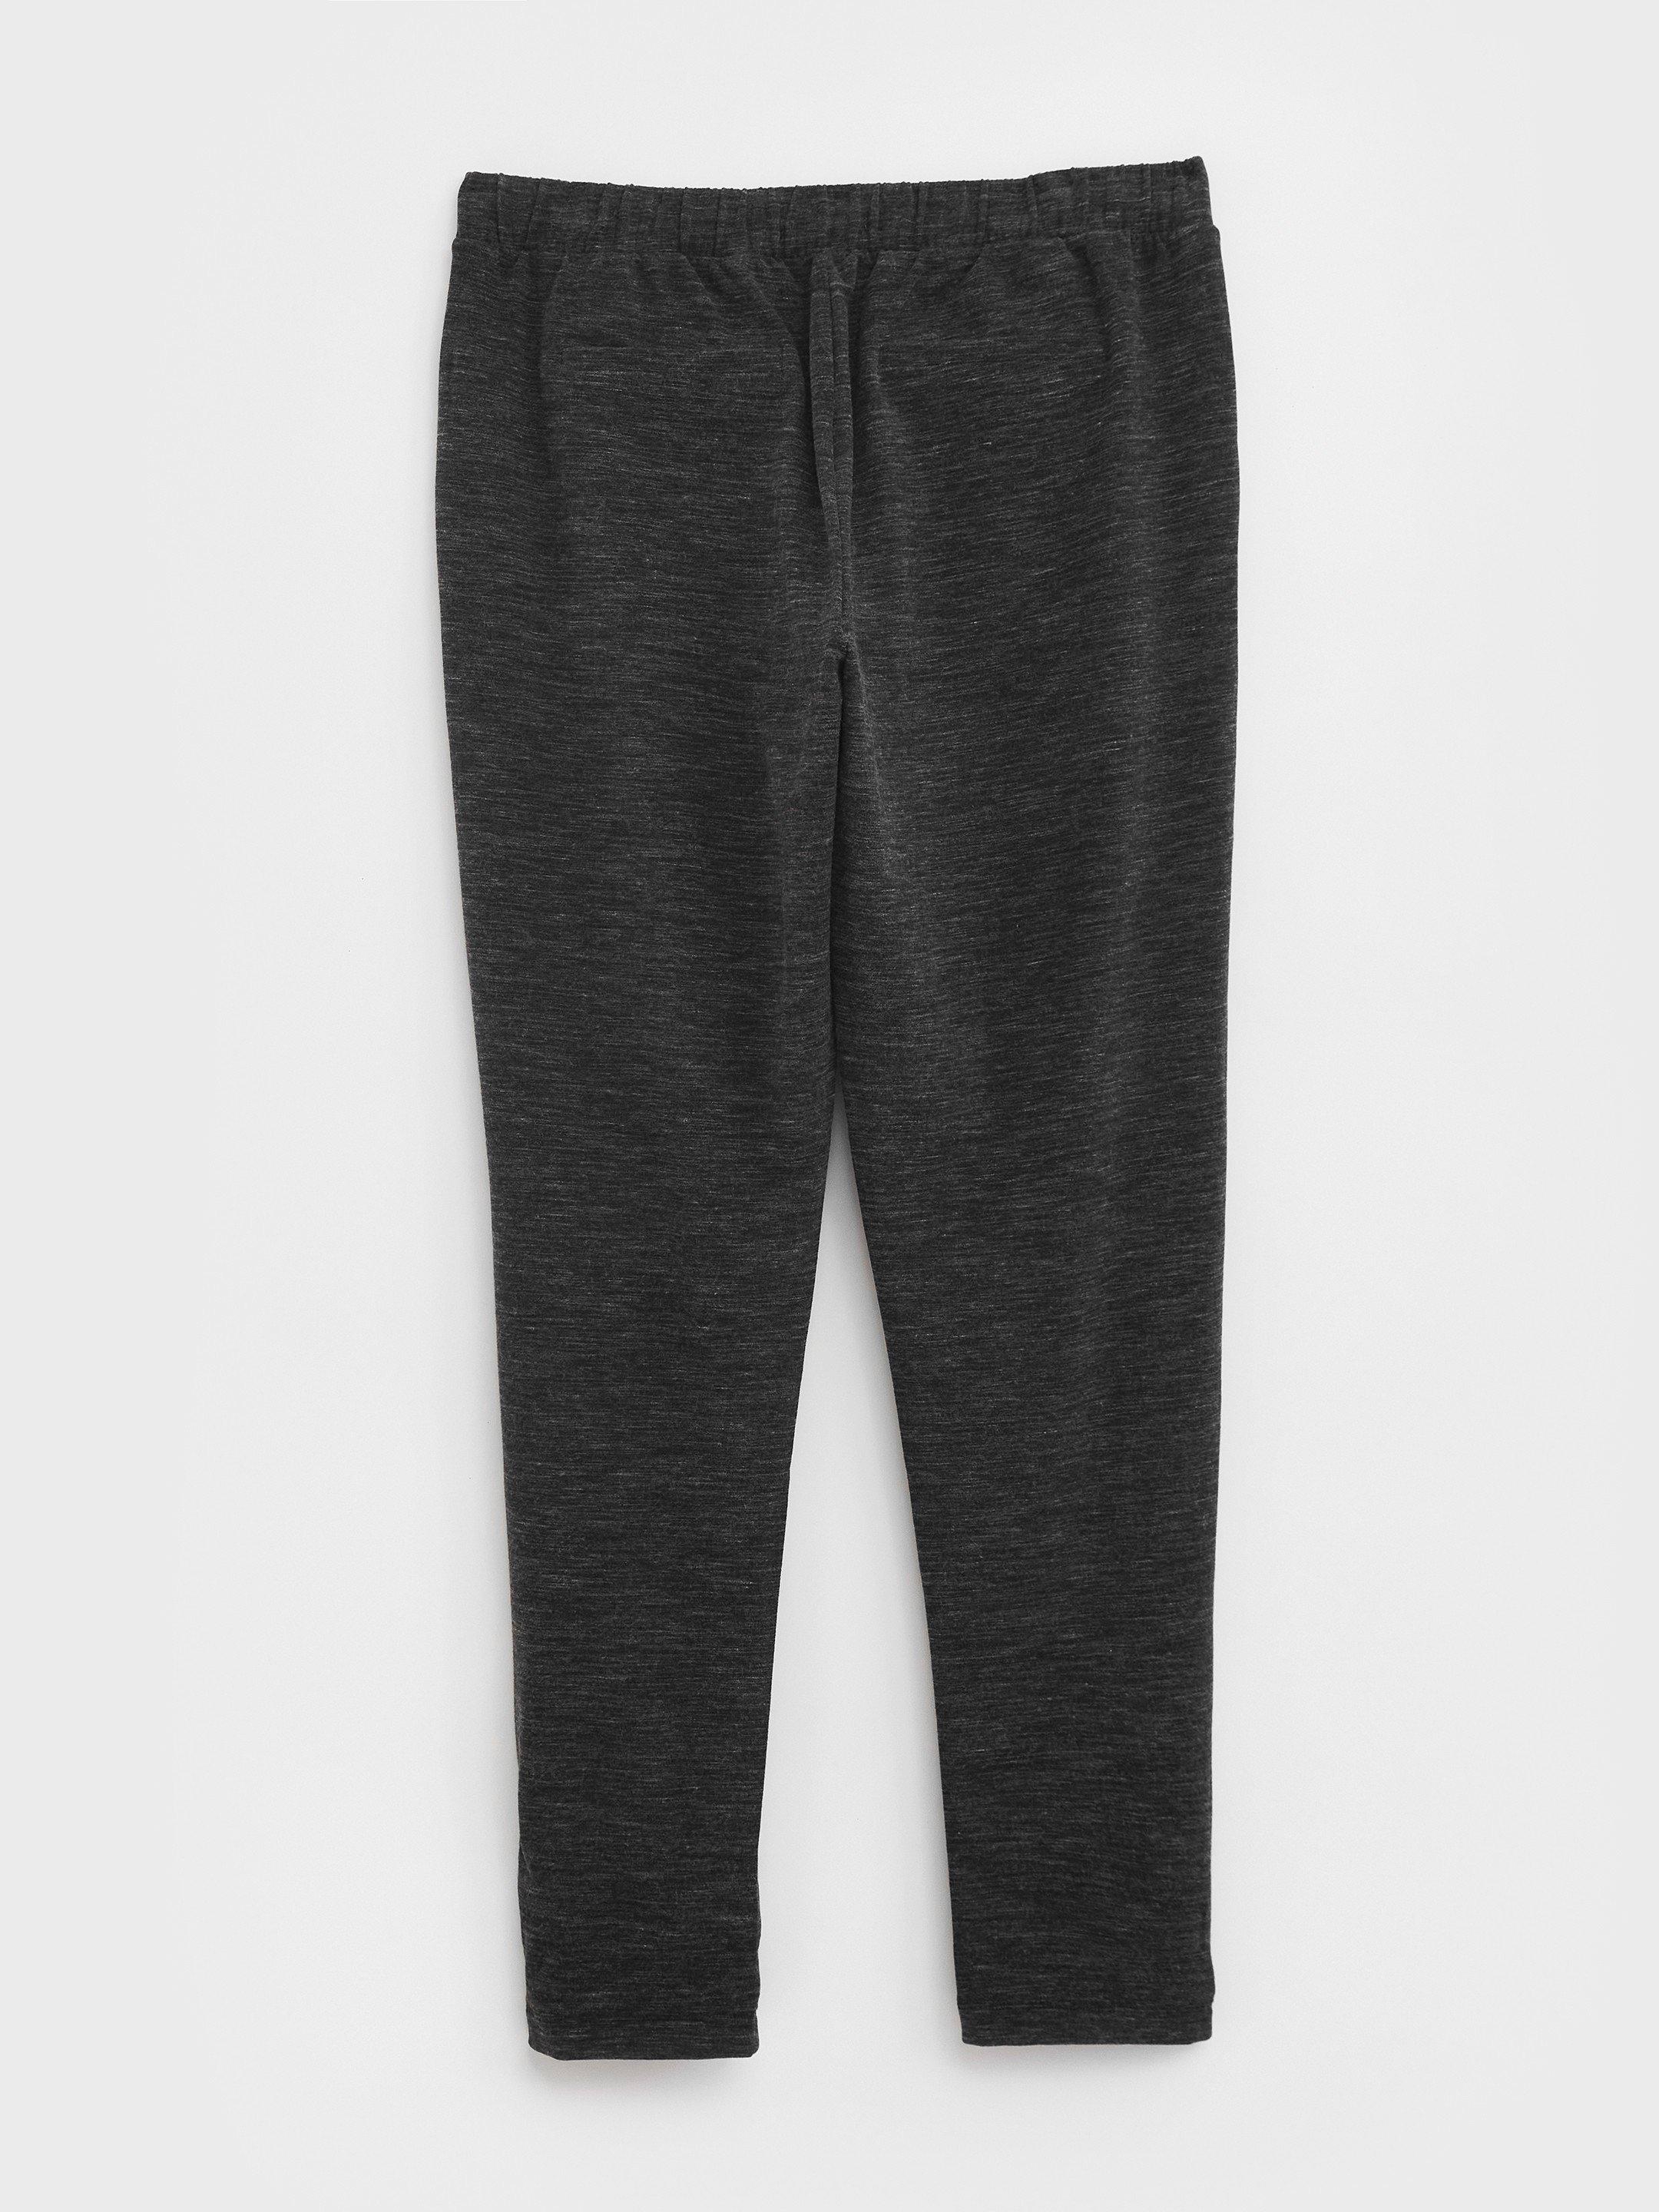 Maison Jogger in CHARC GREY - FLAT BACK